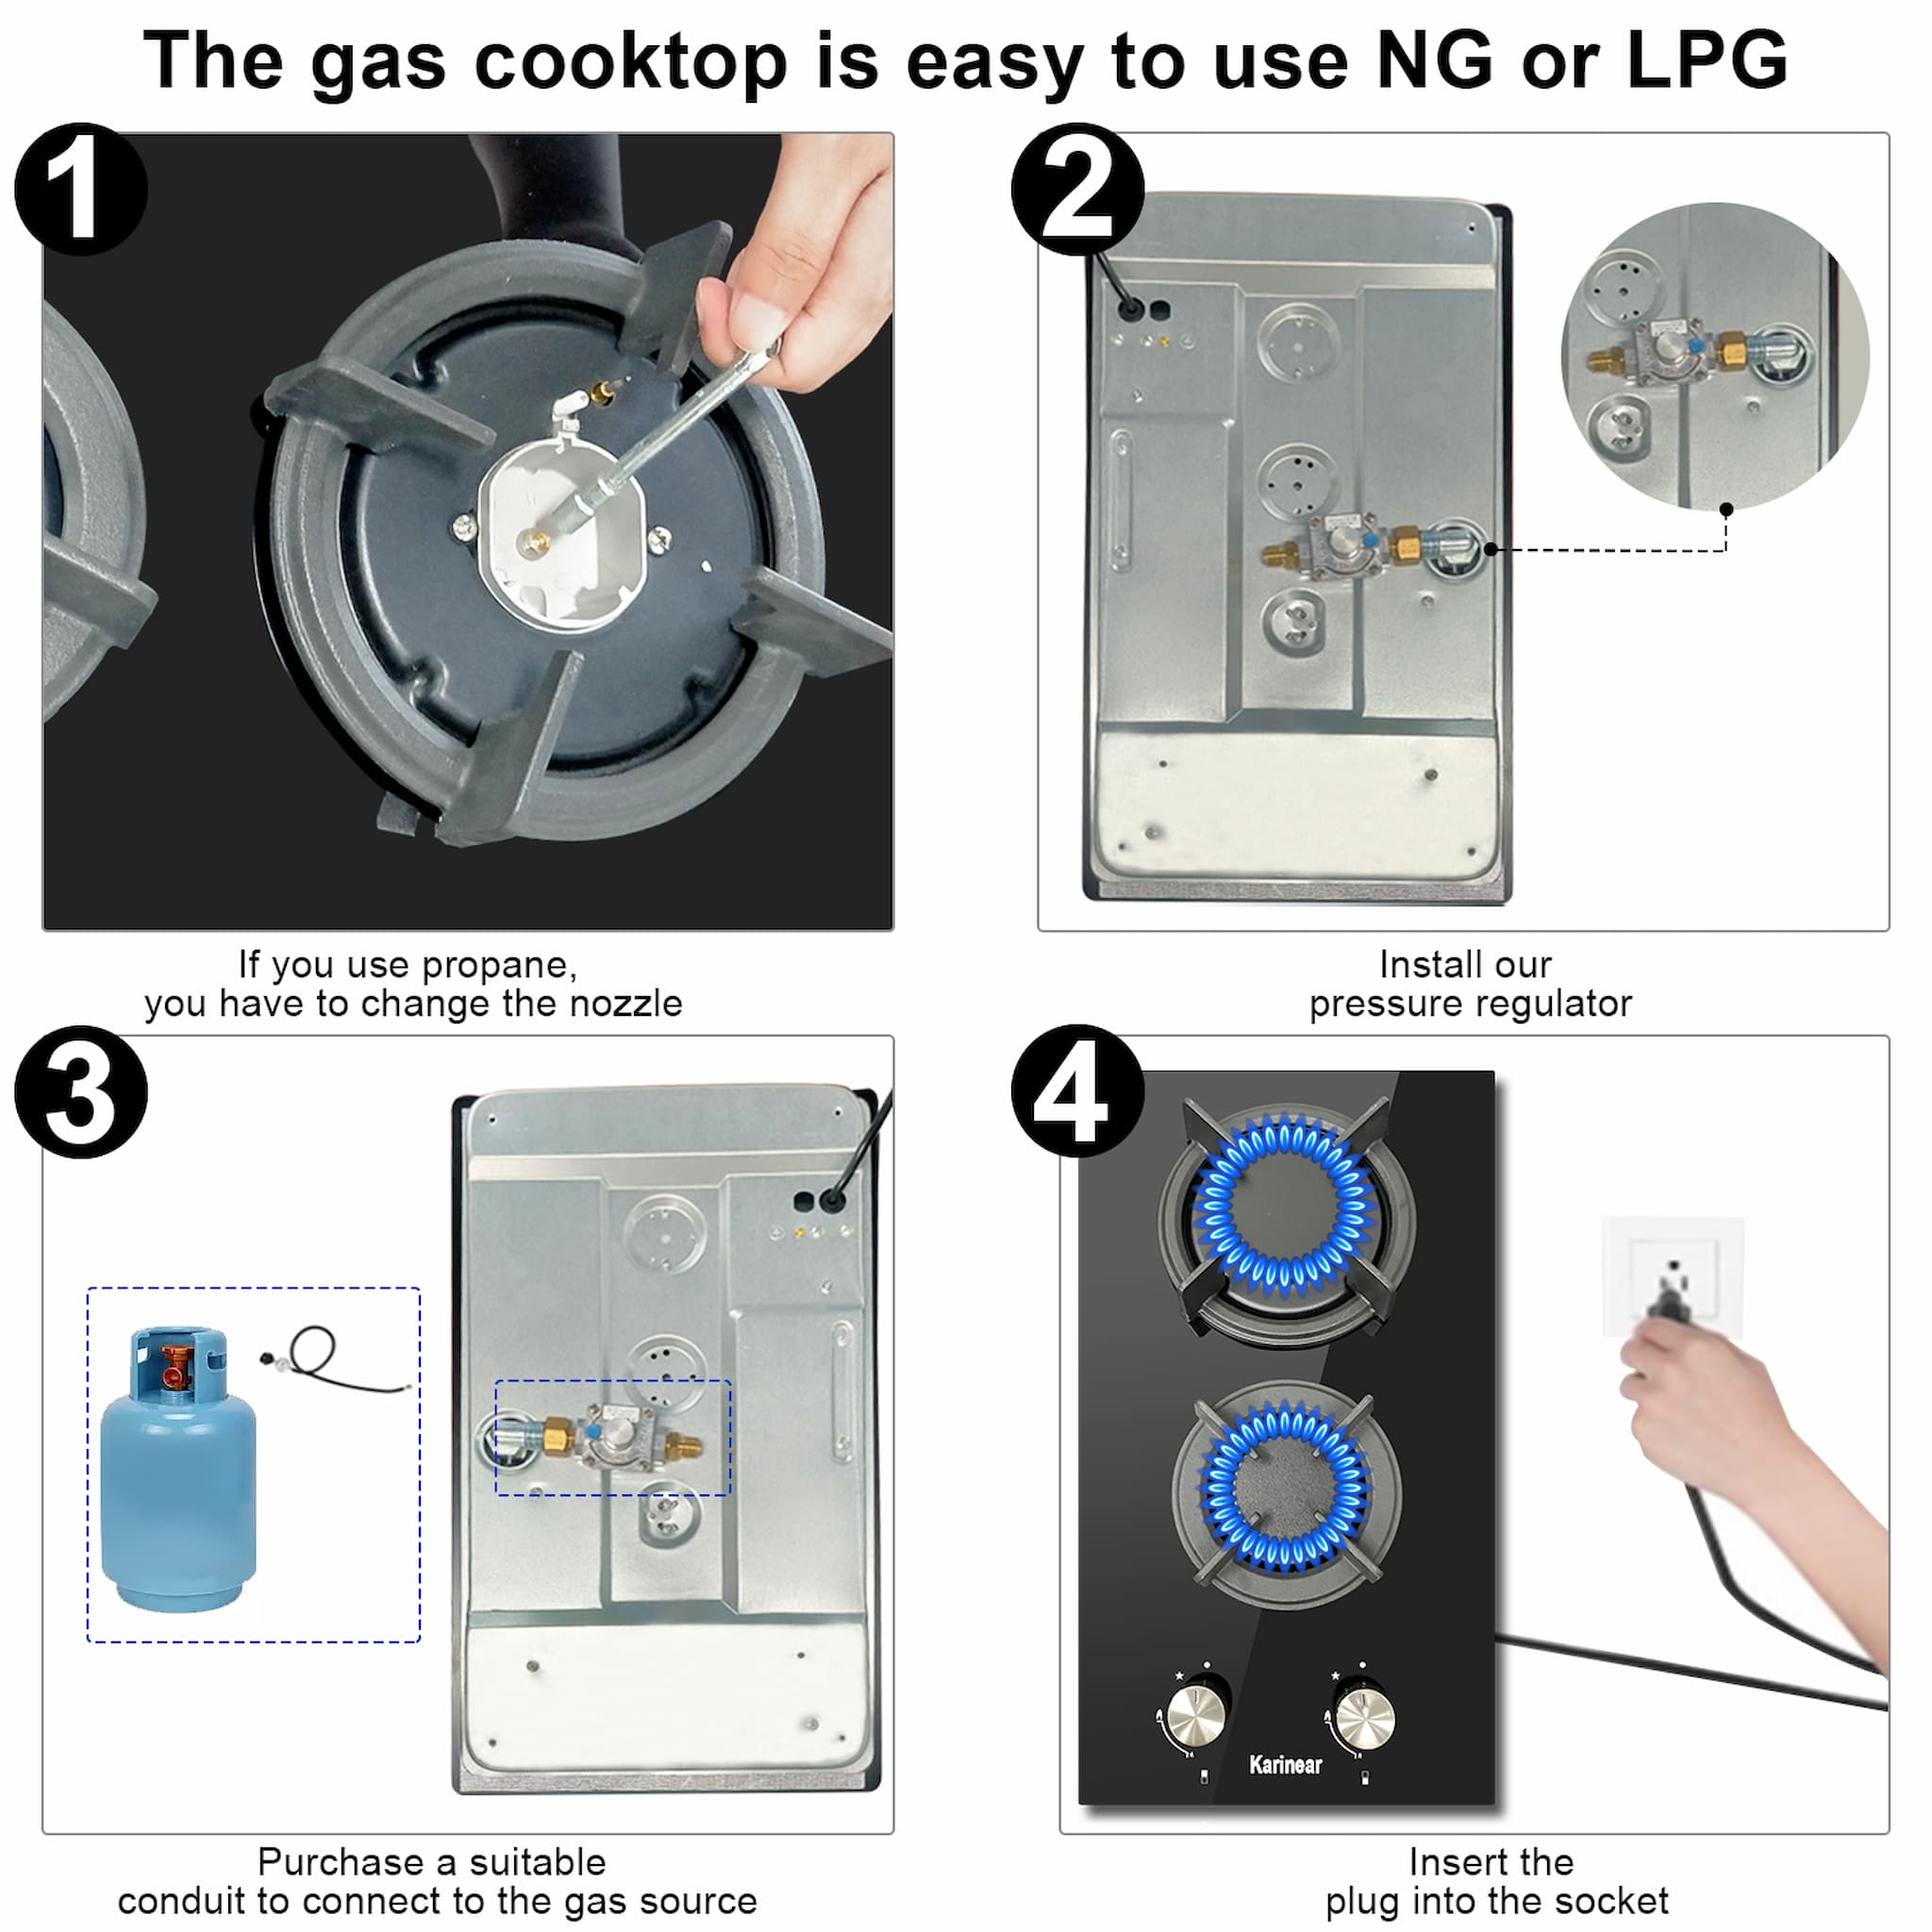 How to install the gas cooktop? 1. Choose the correct gas stove nozzle, if you are going to use propane, you must replace the nozzle.  2. The pressure reducing valve must be installed. There are two ways to install the pressure reducing valve.  3. Connect to the gas stove source via a suitable NG/LPG fuel hose